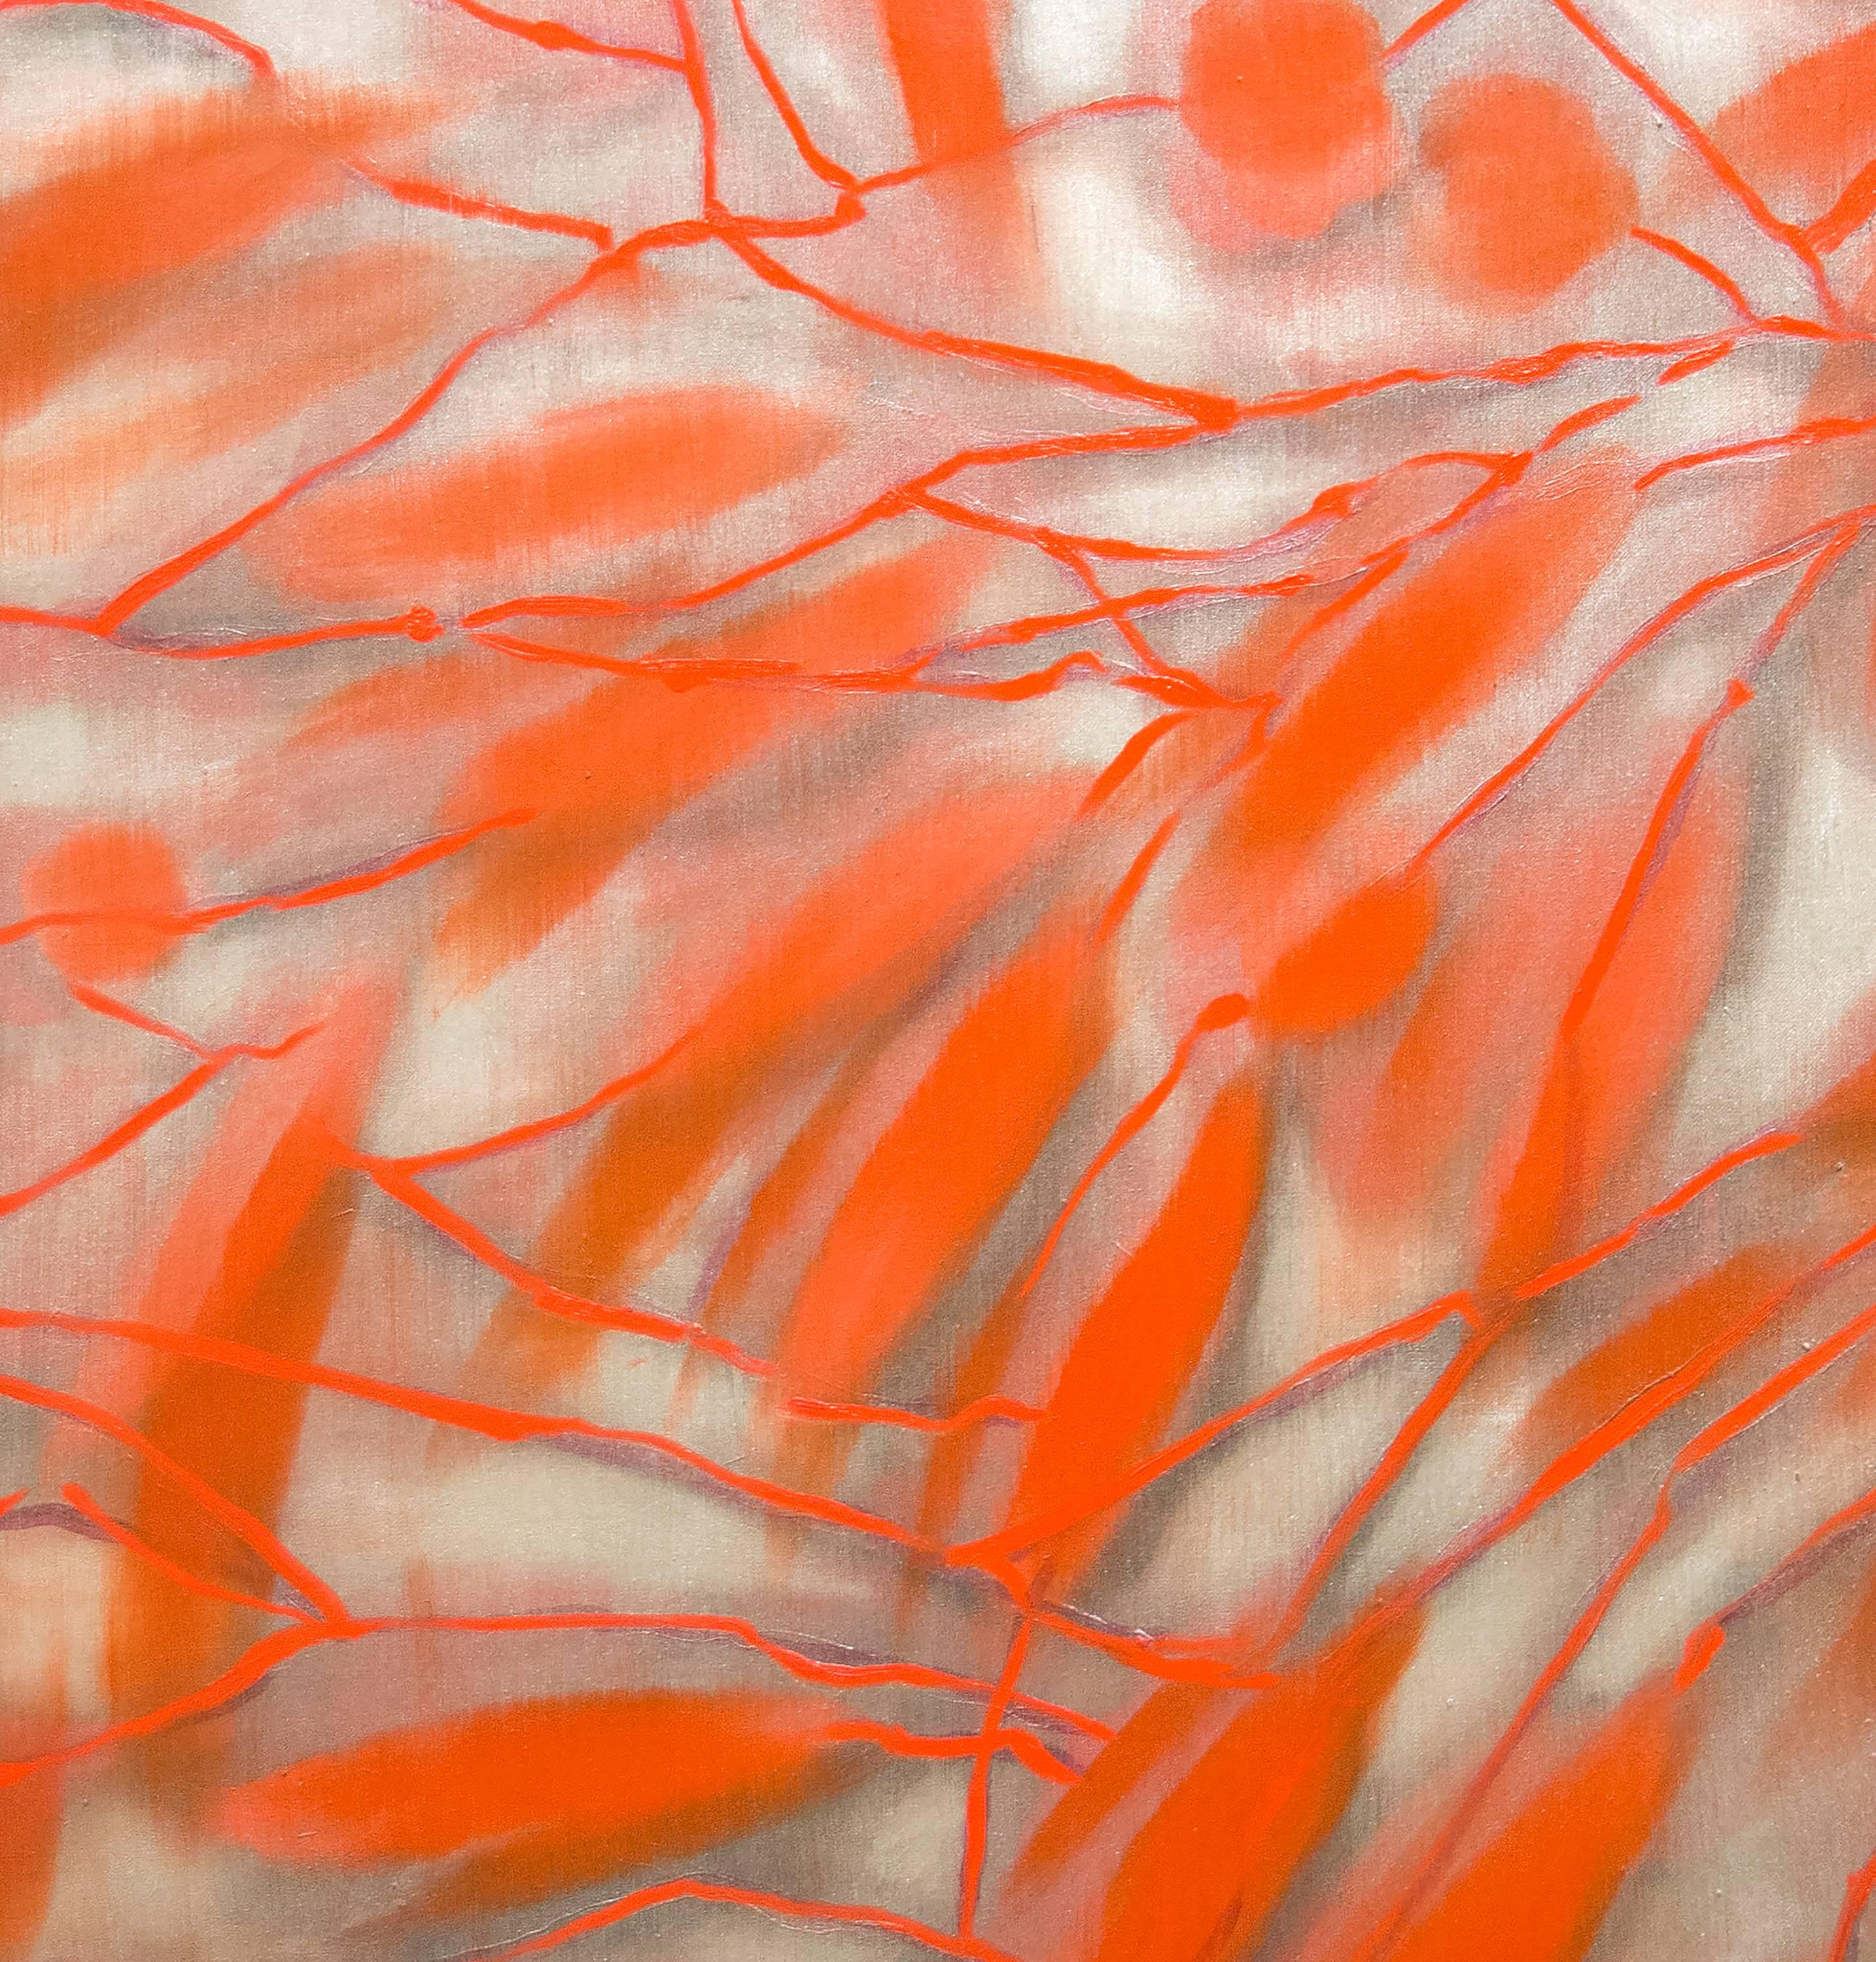 An oil on linen canvas painting by contemporary artist Ross Bleckner. 